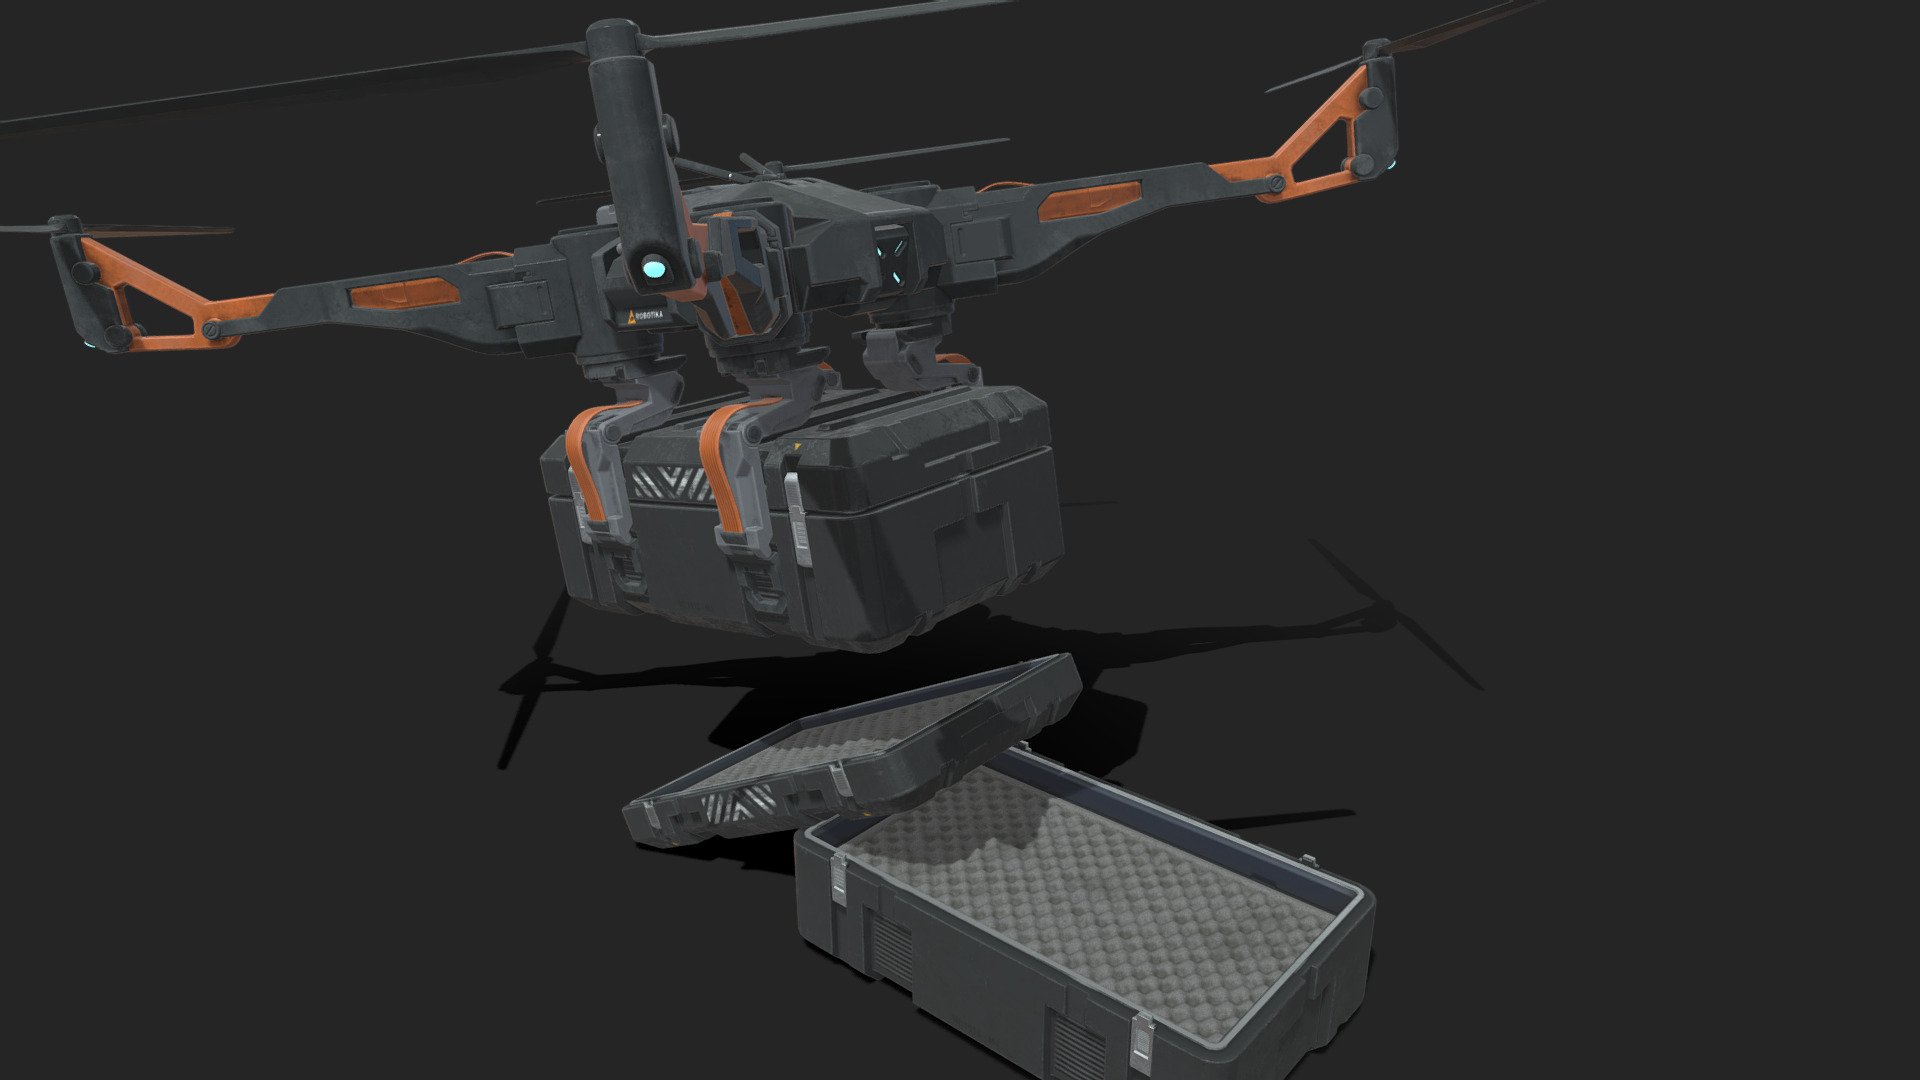 Quadcopter Drone.

Modeled in Blender 2.81a. Textured in Substance Painter. Uses weighted normals, might need weighted normals modifier re-applied if the geometry is edited. (Scaling, rotation, and translation shouldn't affect the weighted normals, adding or deleting vertices might.)

If you want to see more of my modeling, please check out my artstation: https://jonasp.artstation.com/ - Quadcopter Drone - Buy Royalty Free 3D model by Jonas Prunskus (@JPrun) 3d model